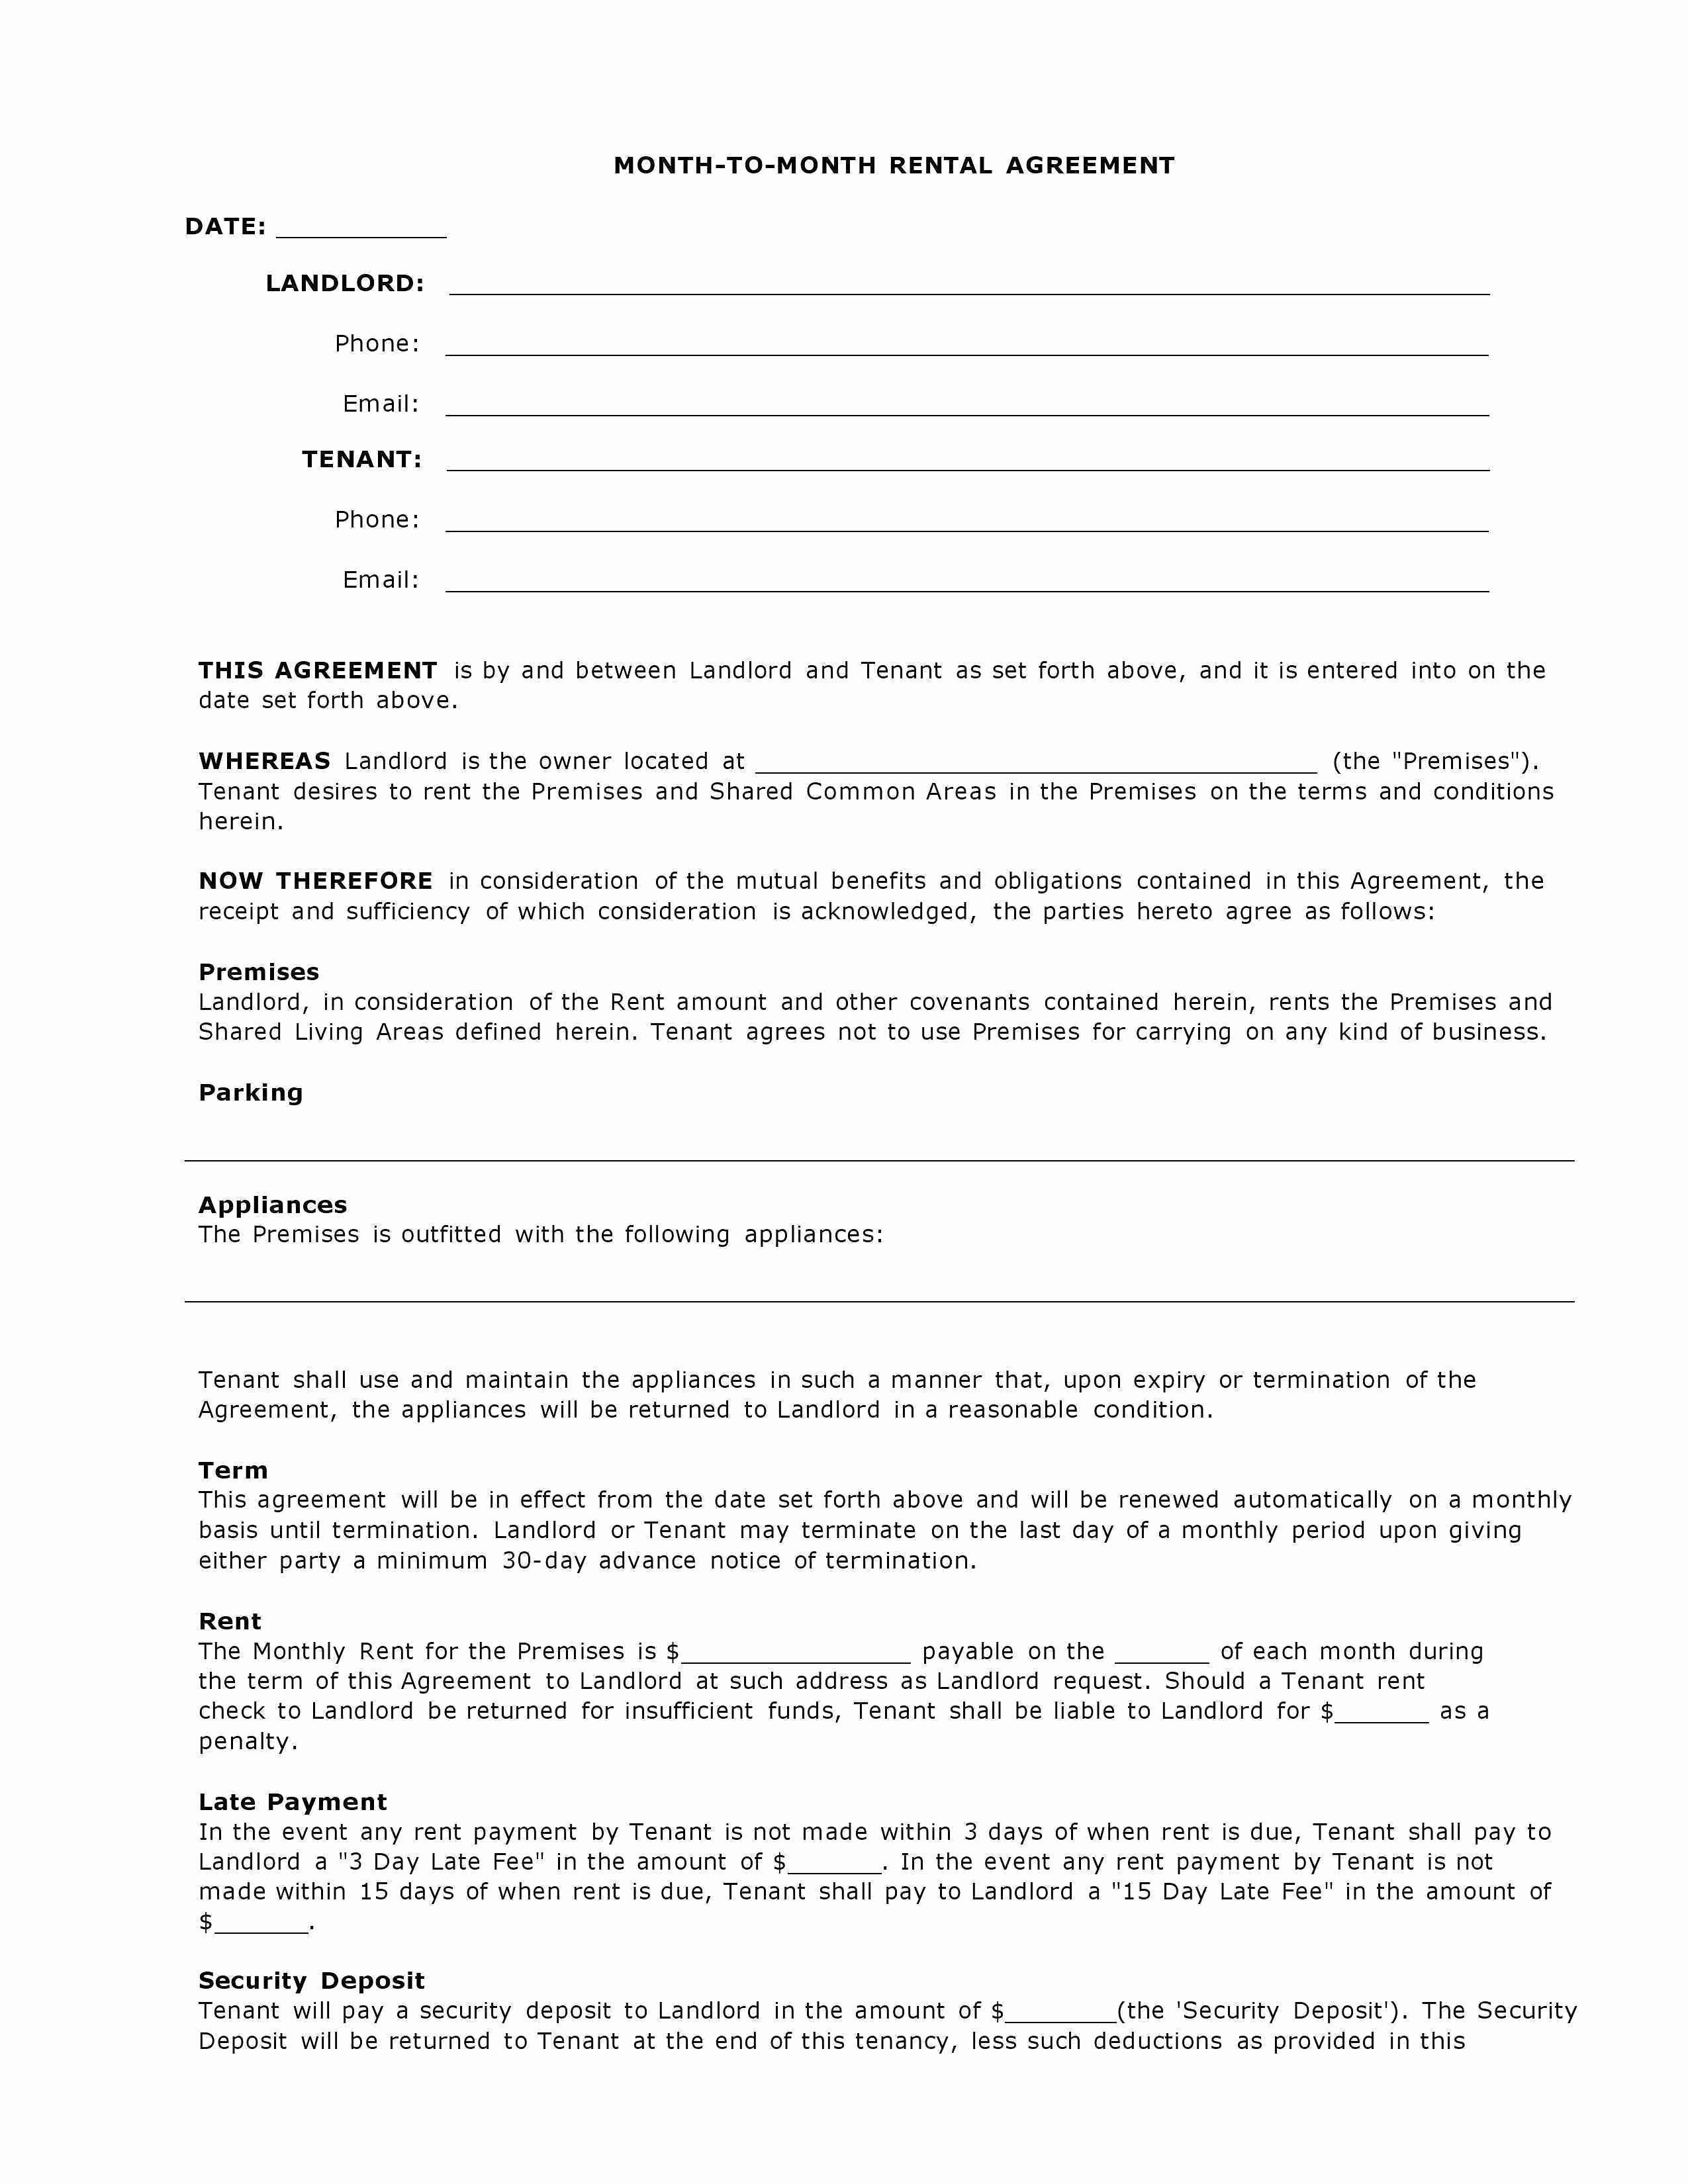 Wedding Band Contract Template Unique Graphy Contract Template Pdf Awesome event Graphy